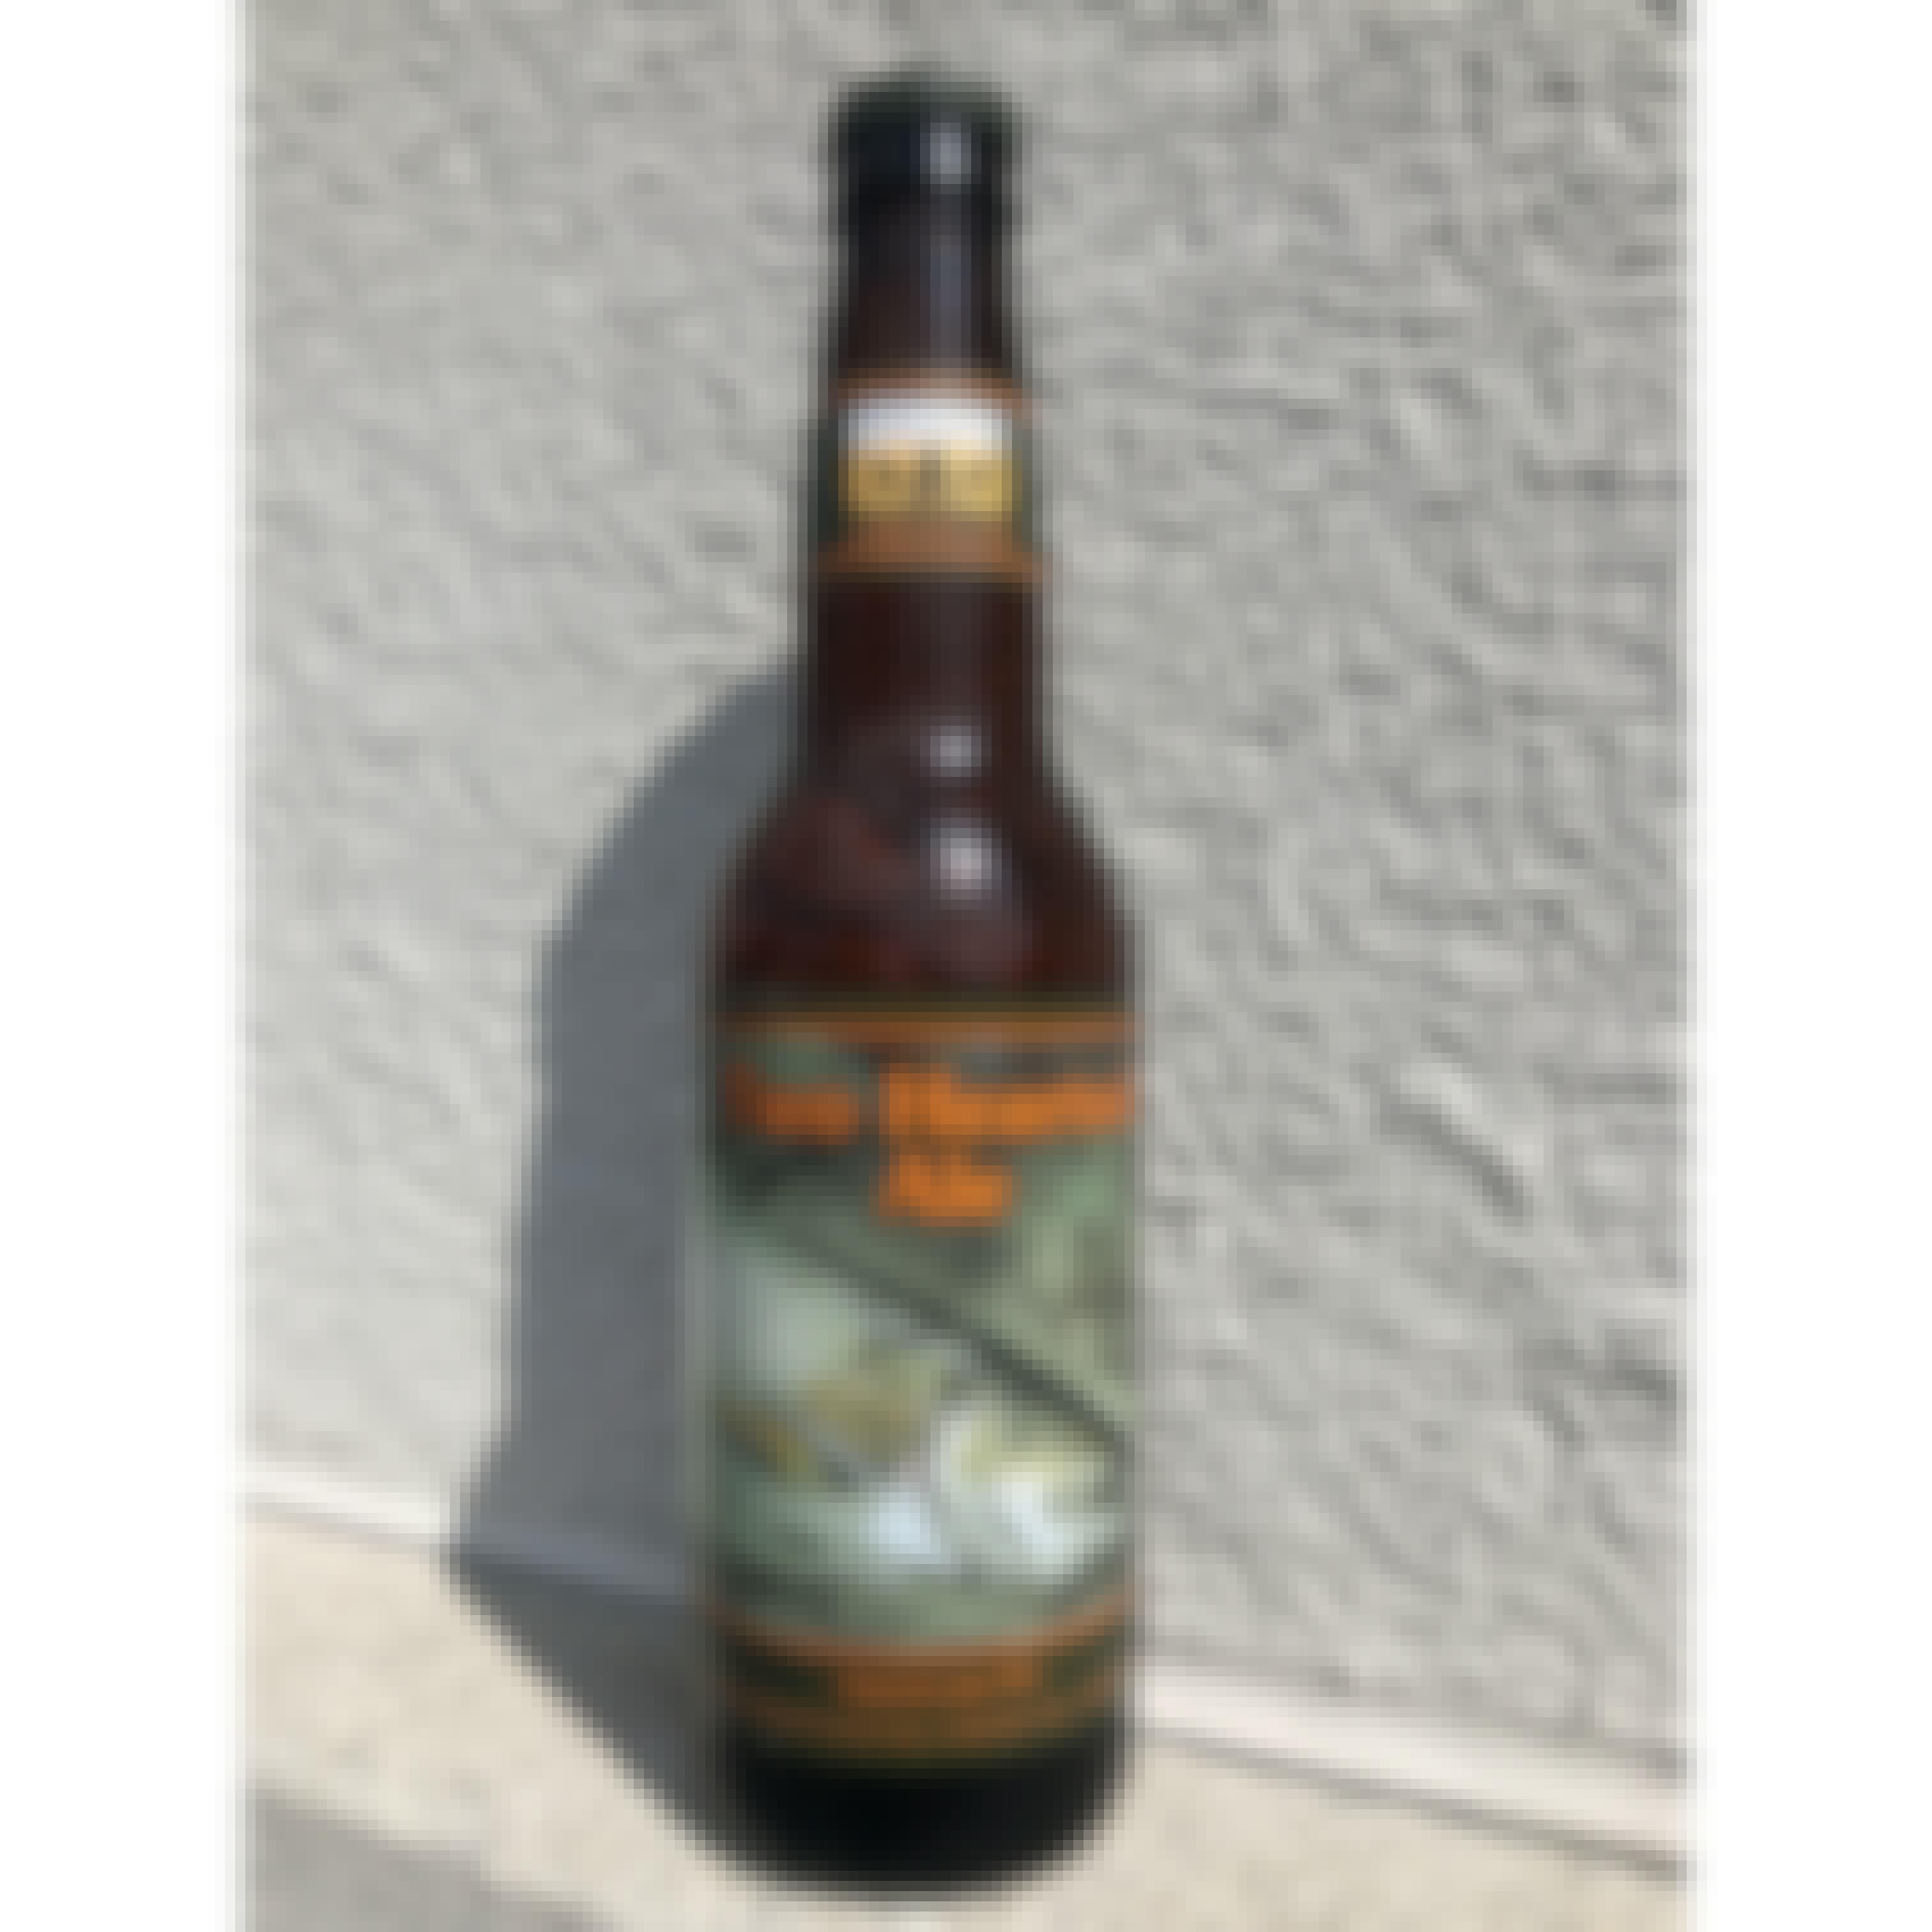 Bell's Brewery Two Hearted Ale 12 oz. Bottle